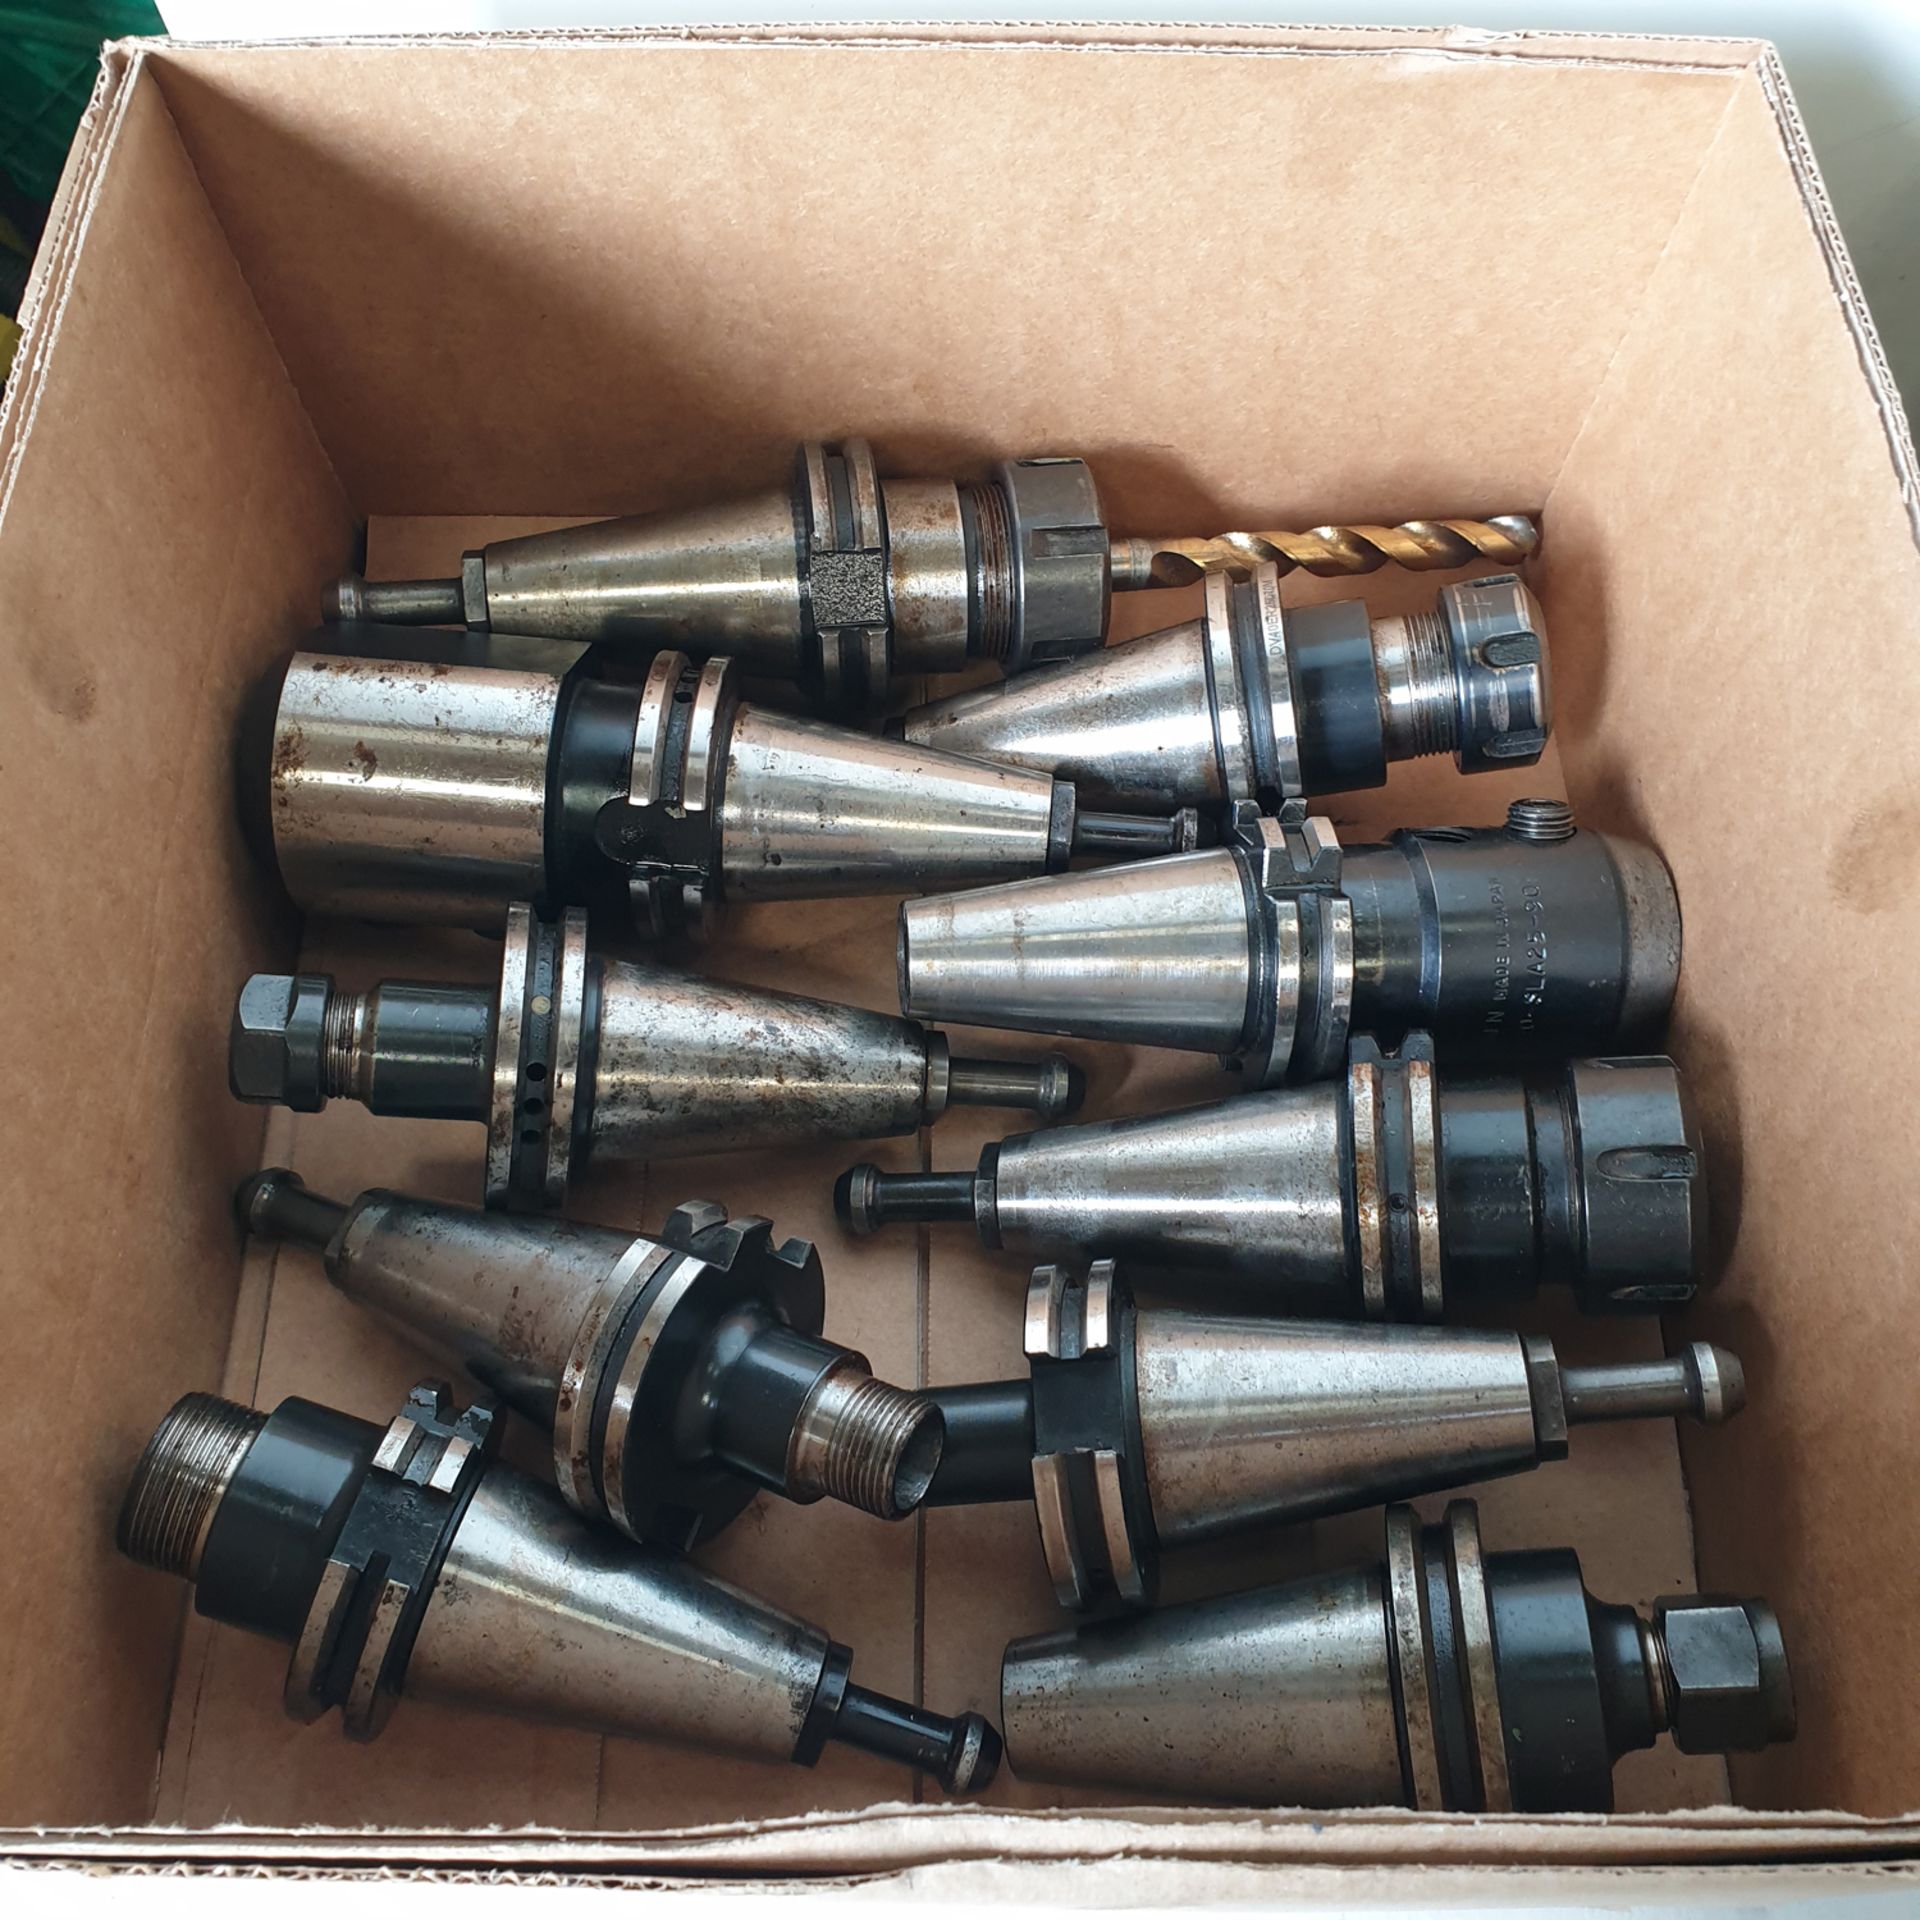 10 x Milling Spindle Tools. SK40/DV40 Taper. - Image 2 of 2